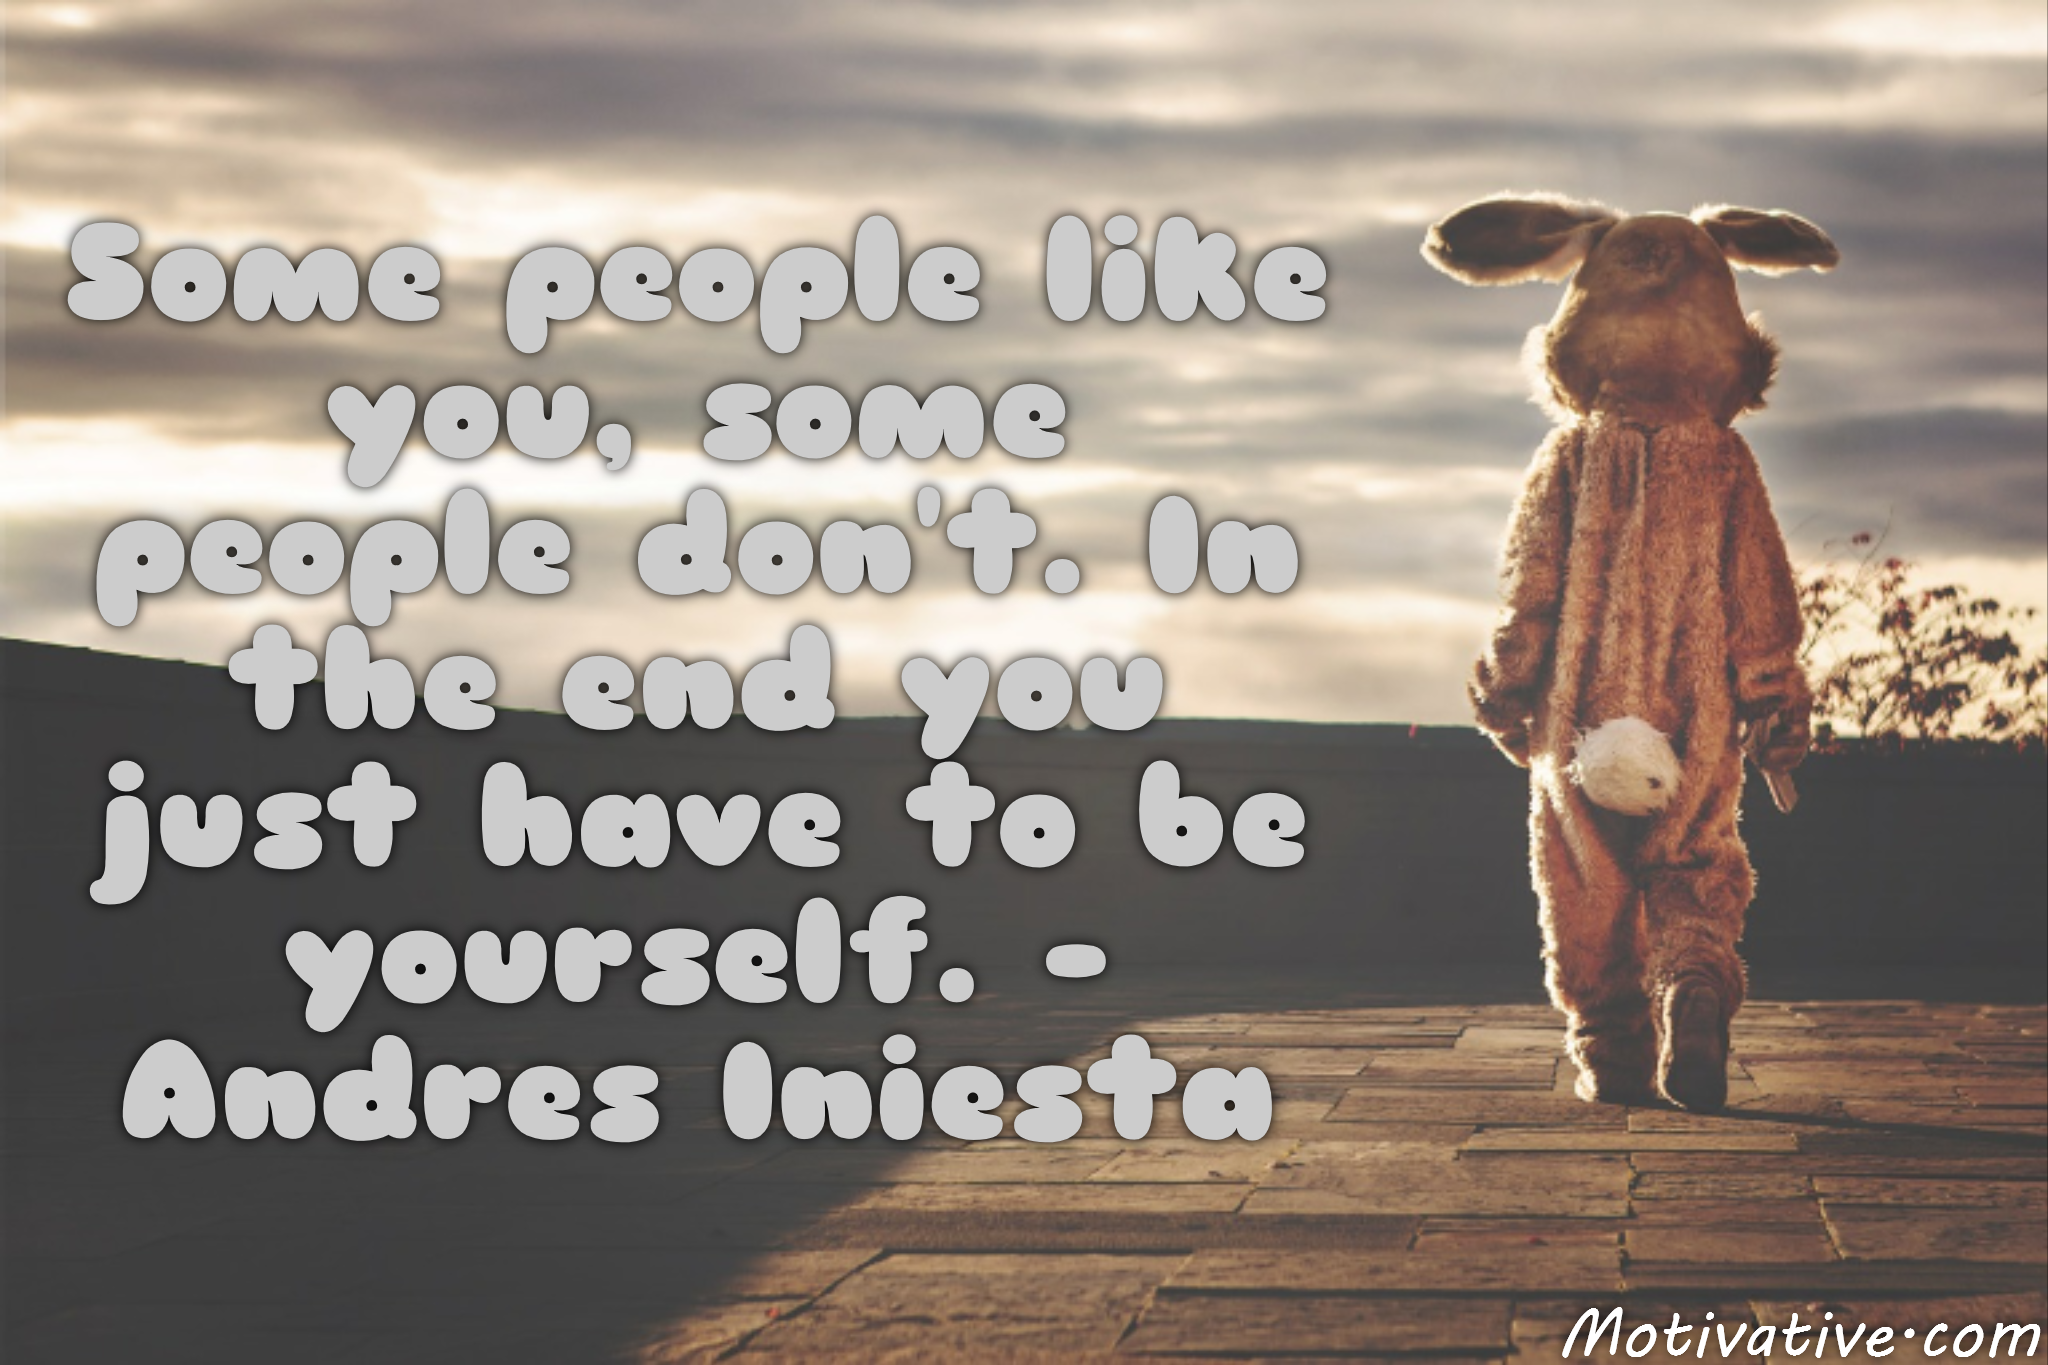 Some people like you, some people don’t. In the end you just have to be yourself. – Andres Iniesta